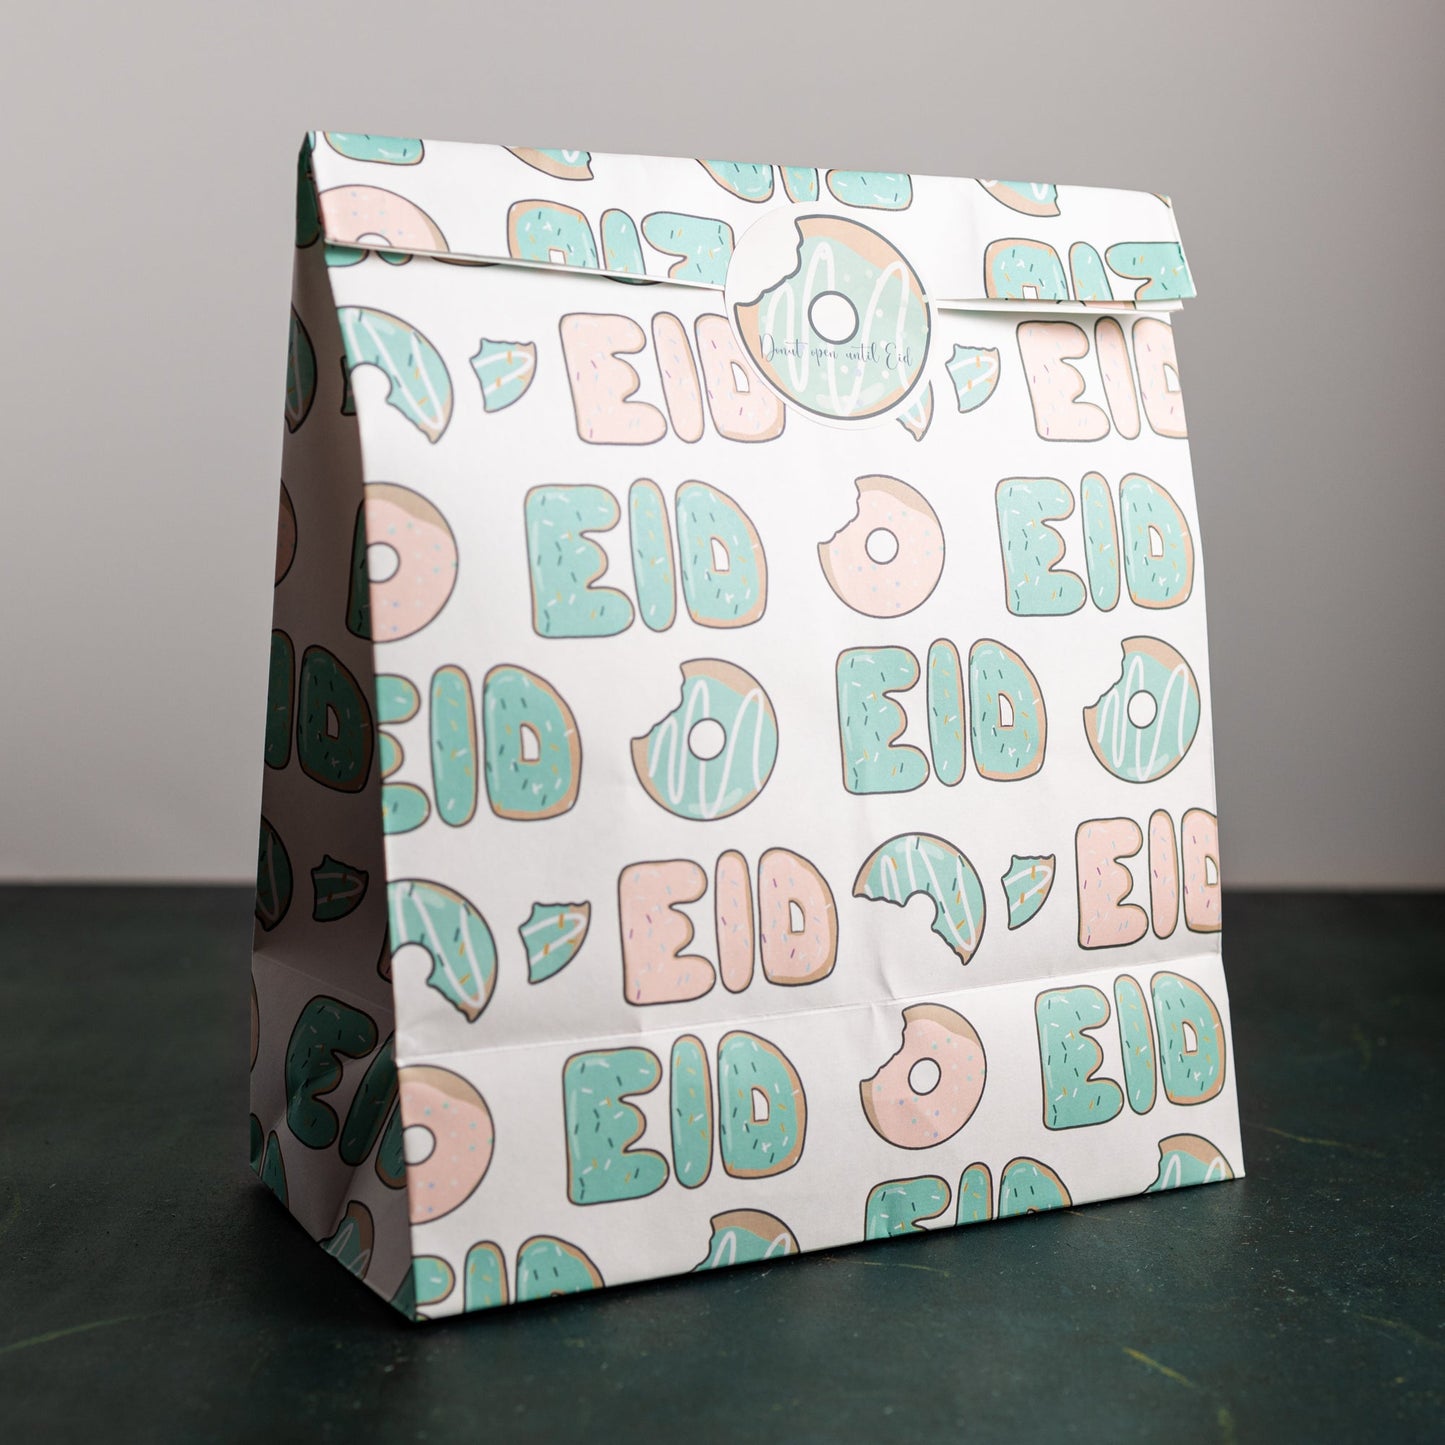 SALE - 50% off Eid donut bags with stickers - Set of 8